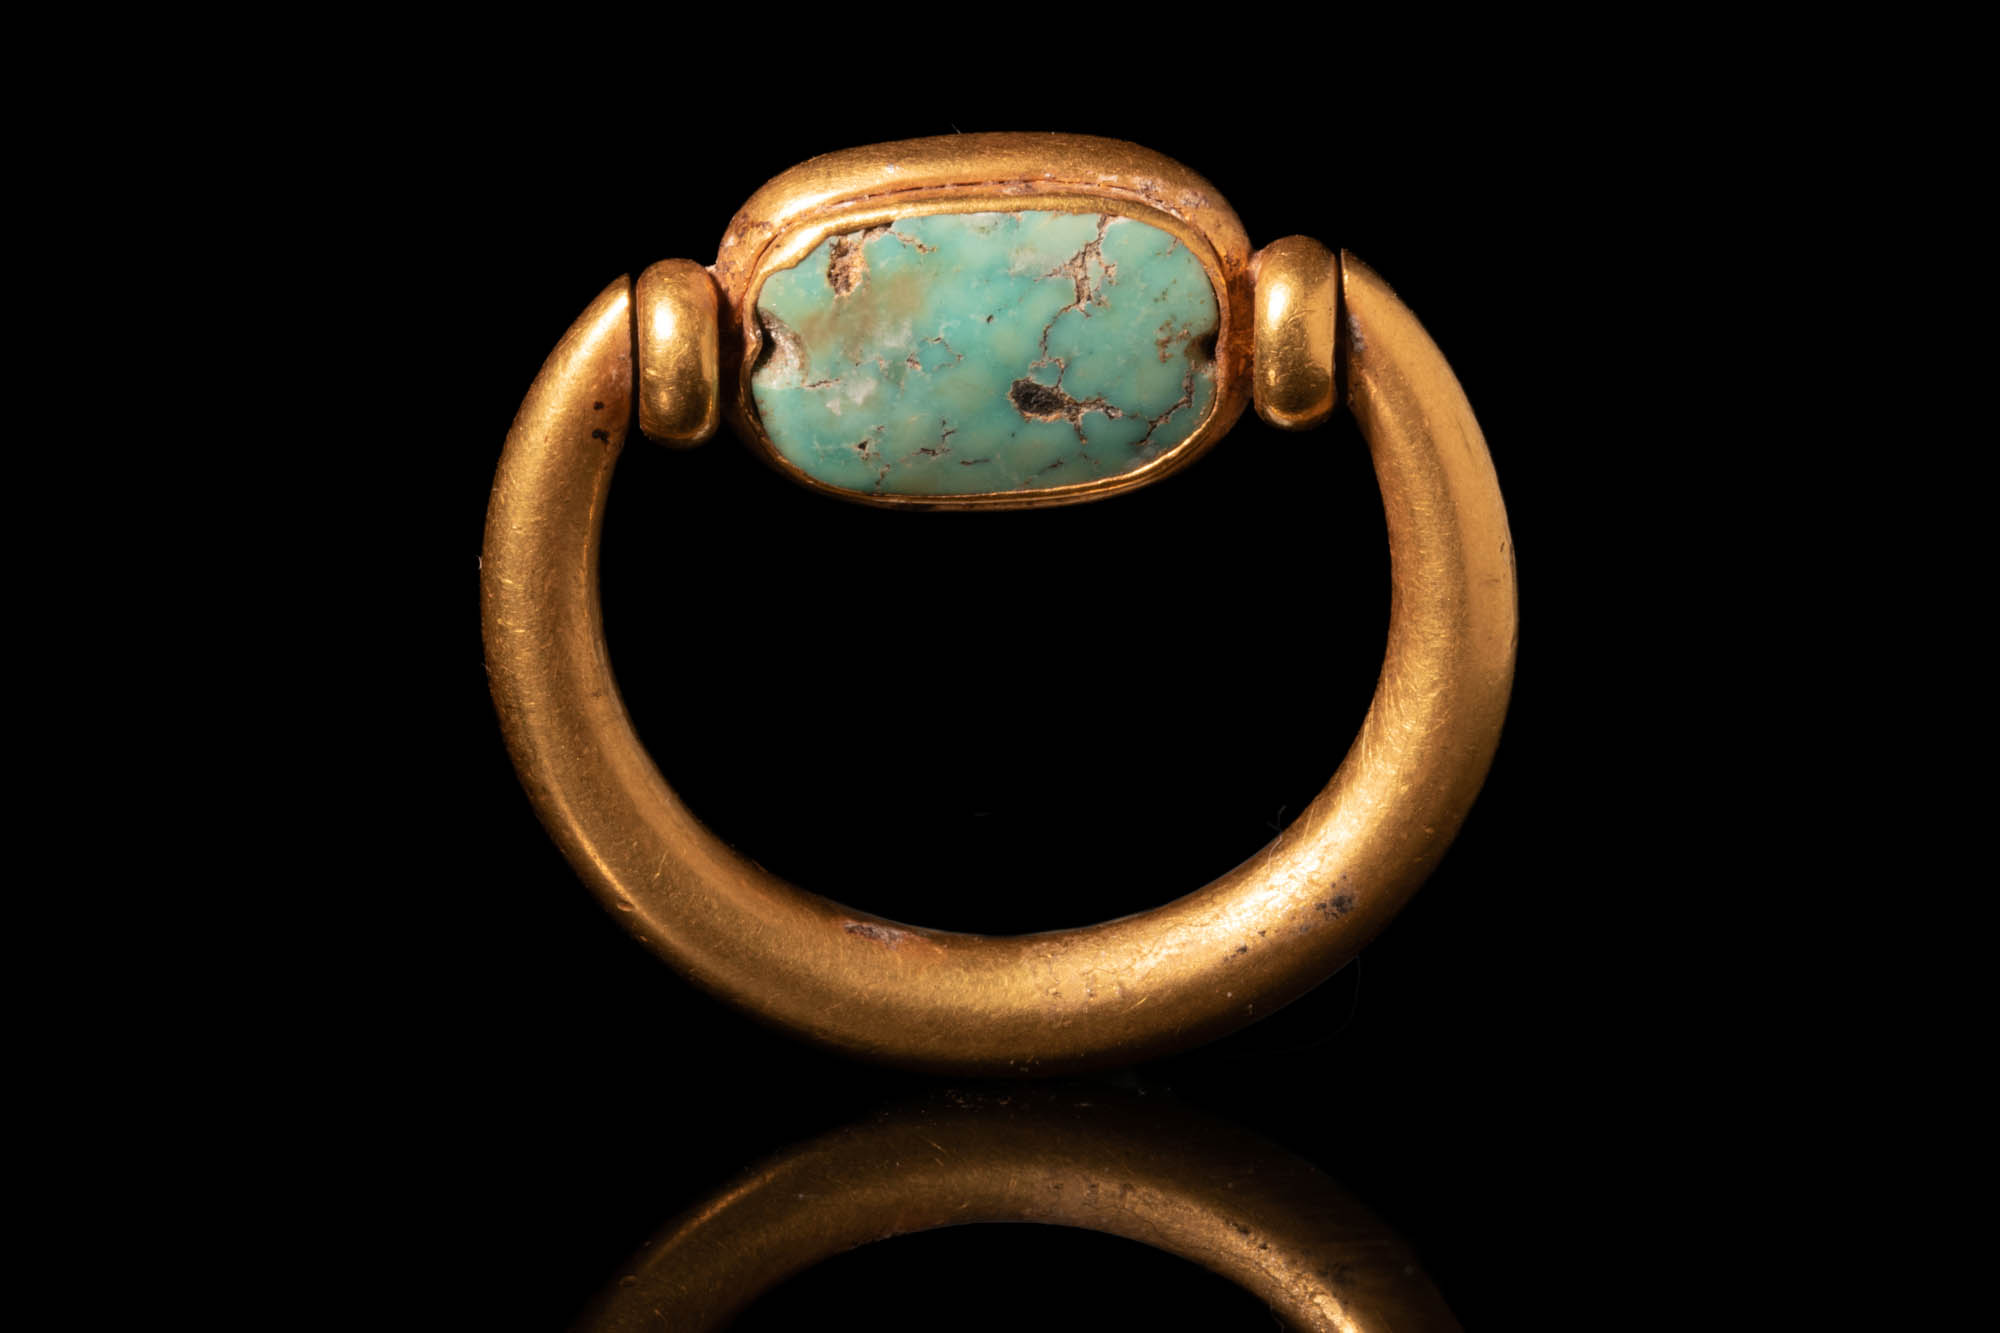 EGYPTIAN GOLD FINGER RING WITH TURQUOISE BEZEL - Image 5 of 5